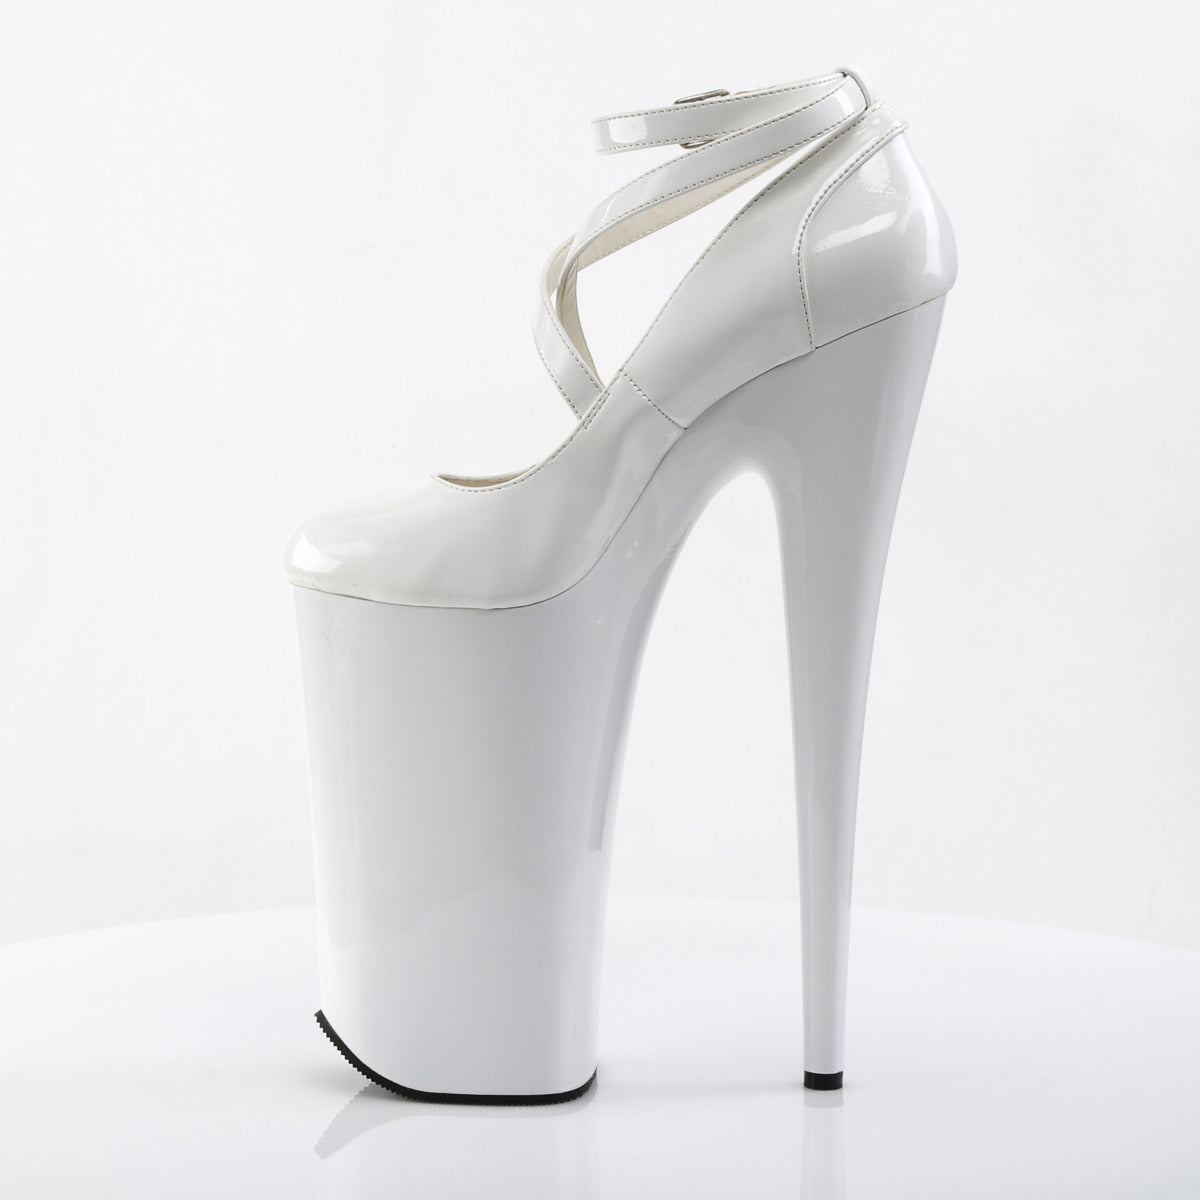 PLEASER BEYOND-008 CLEAR 10 INCH HIGH HEEL PLATFORM SHOES SIZE 7 USA S –  Shoes Of Hollywood